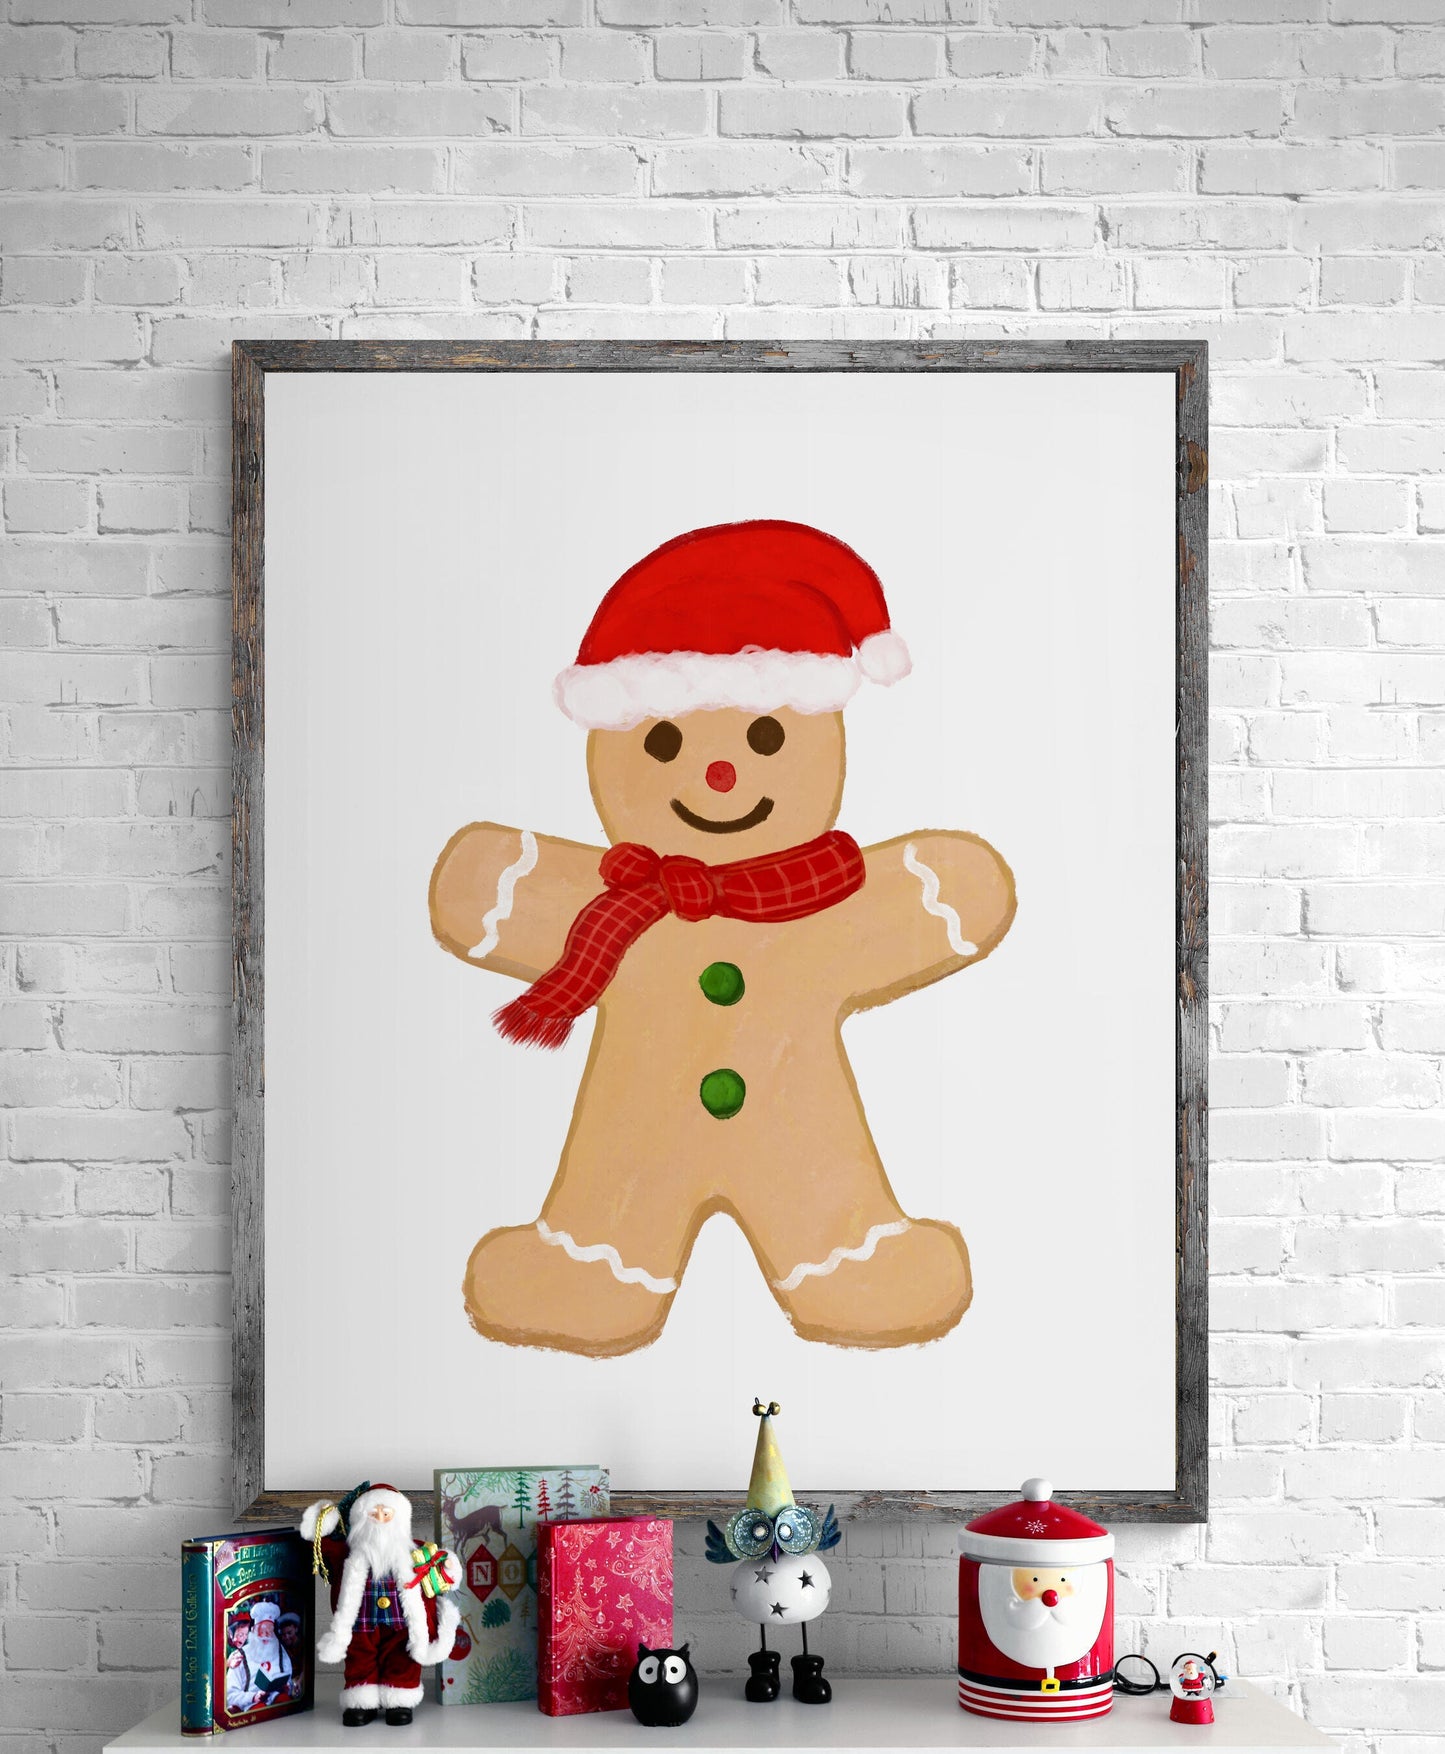 Christmas Gingerbread Man Print, Winter Cookie Art, New Years Gift, Winter Home Decor, Xmas Gingerbread Man Artwork, Cute Winter Cookie Art